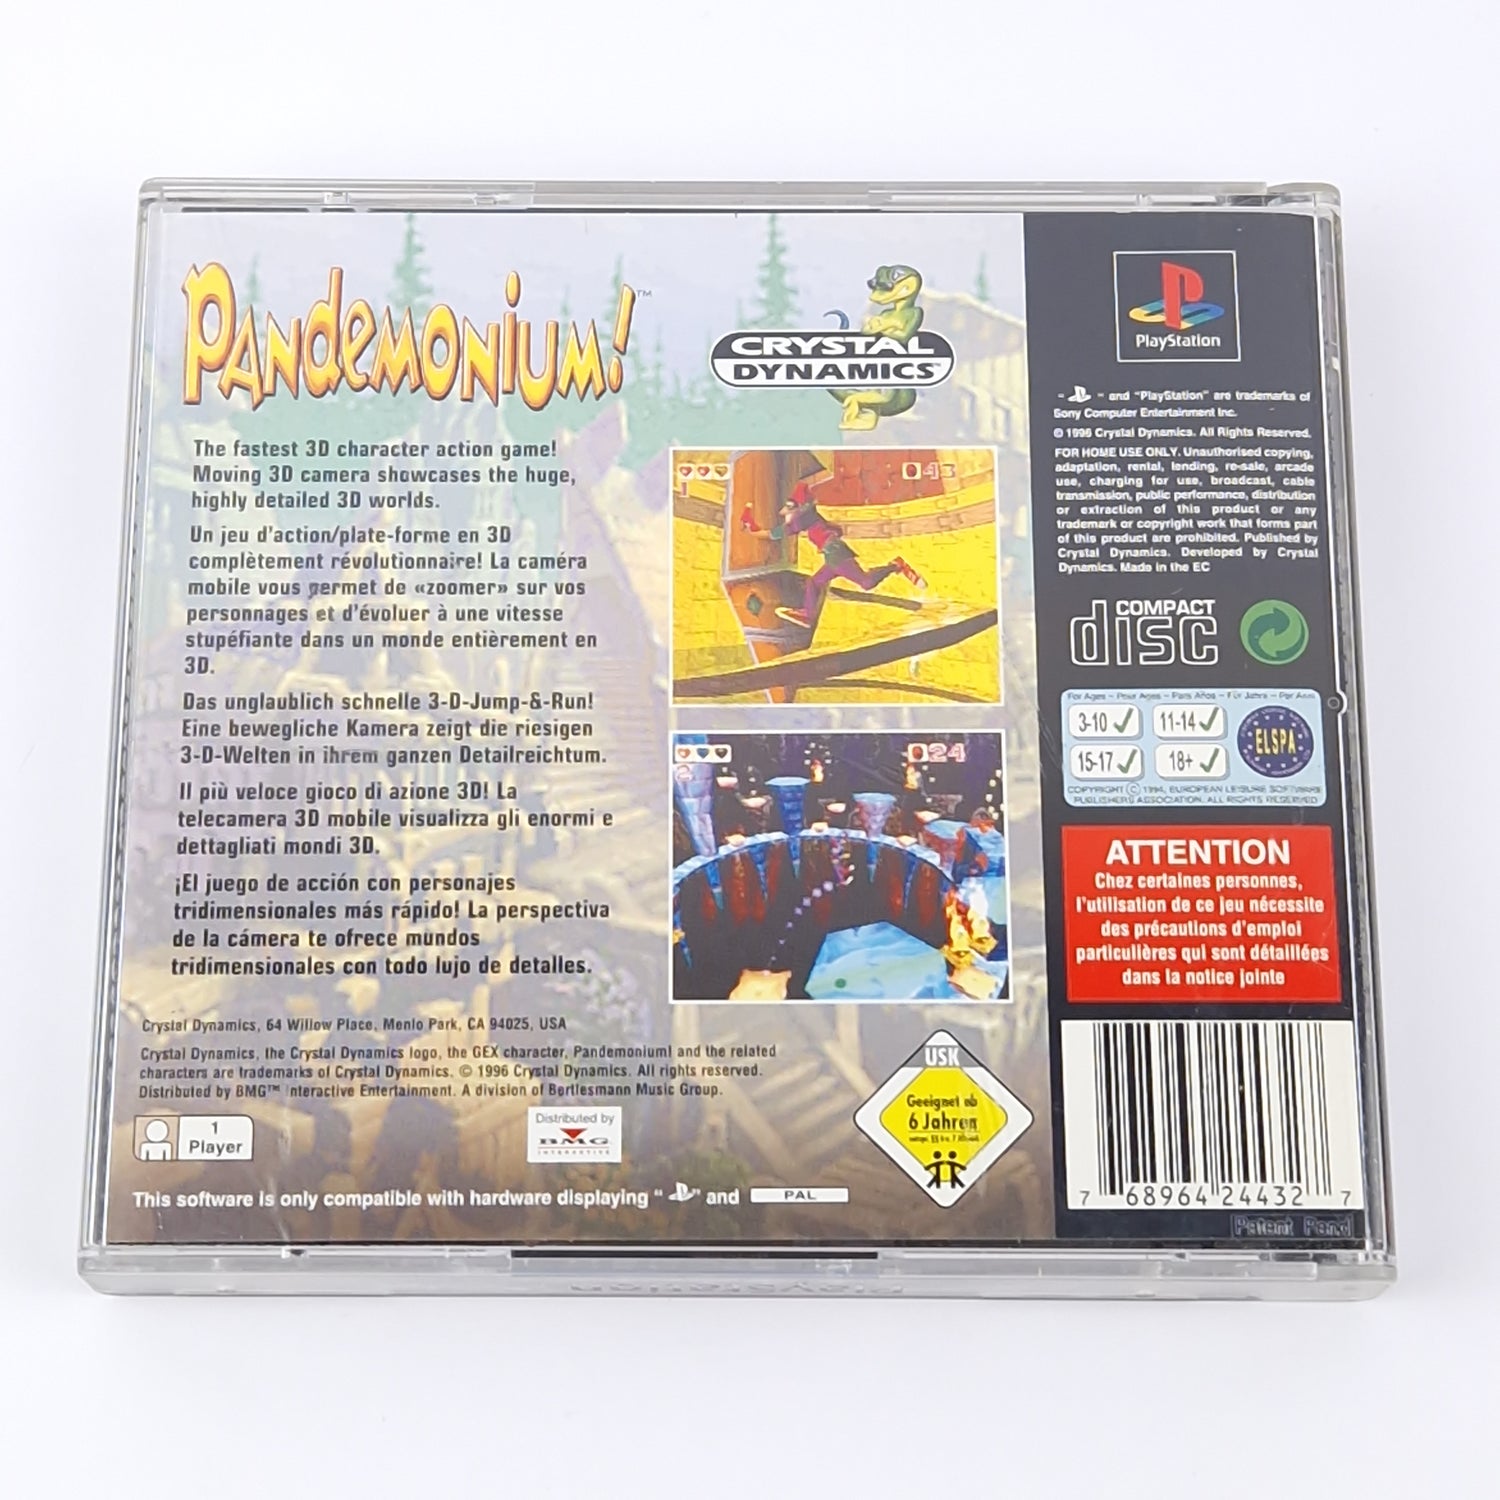 Sony Playstation 1 Spiel : Pandemonium ! - OVP Anleitung CD | PS1 PSX Game